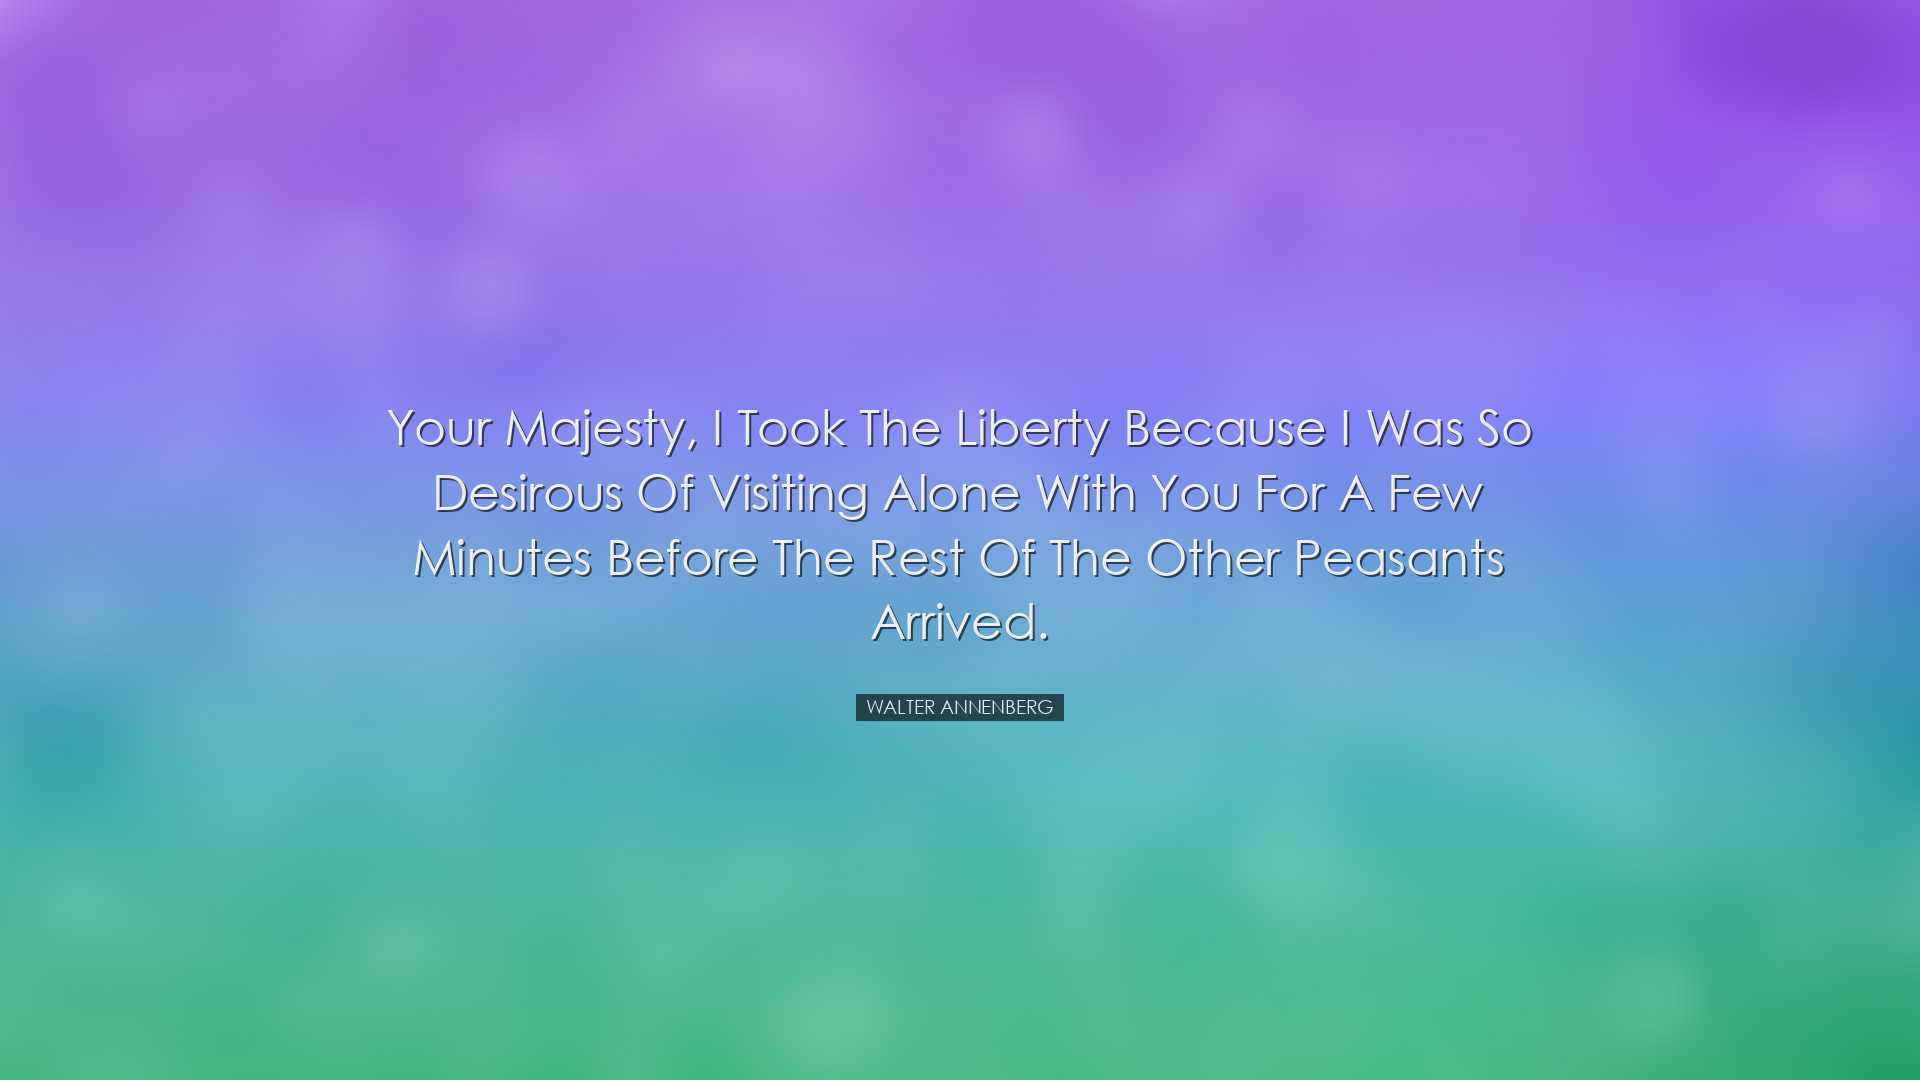 Your Majesty, I took the liberty because I was so desirous of visi